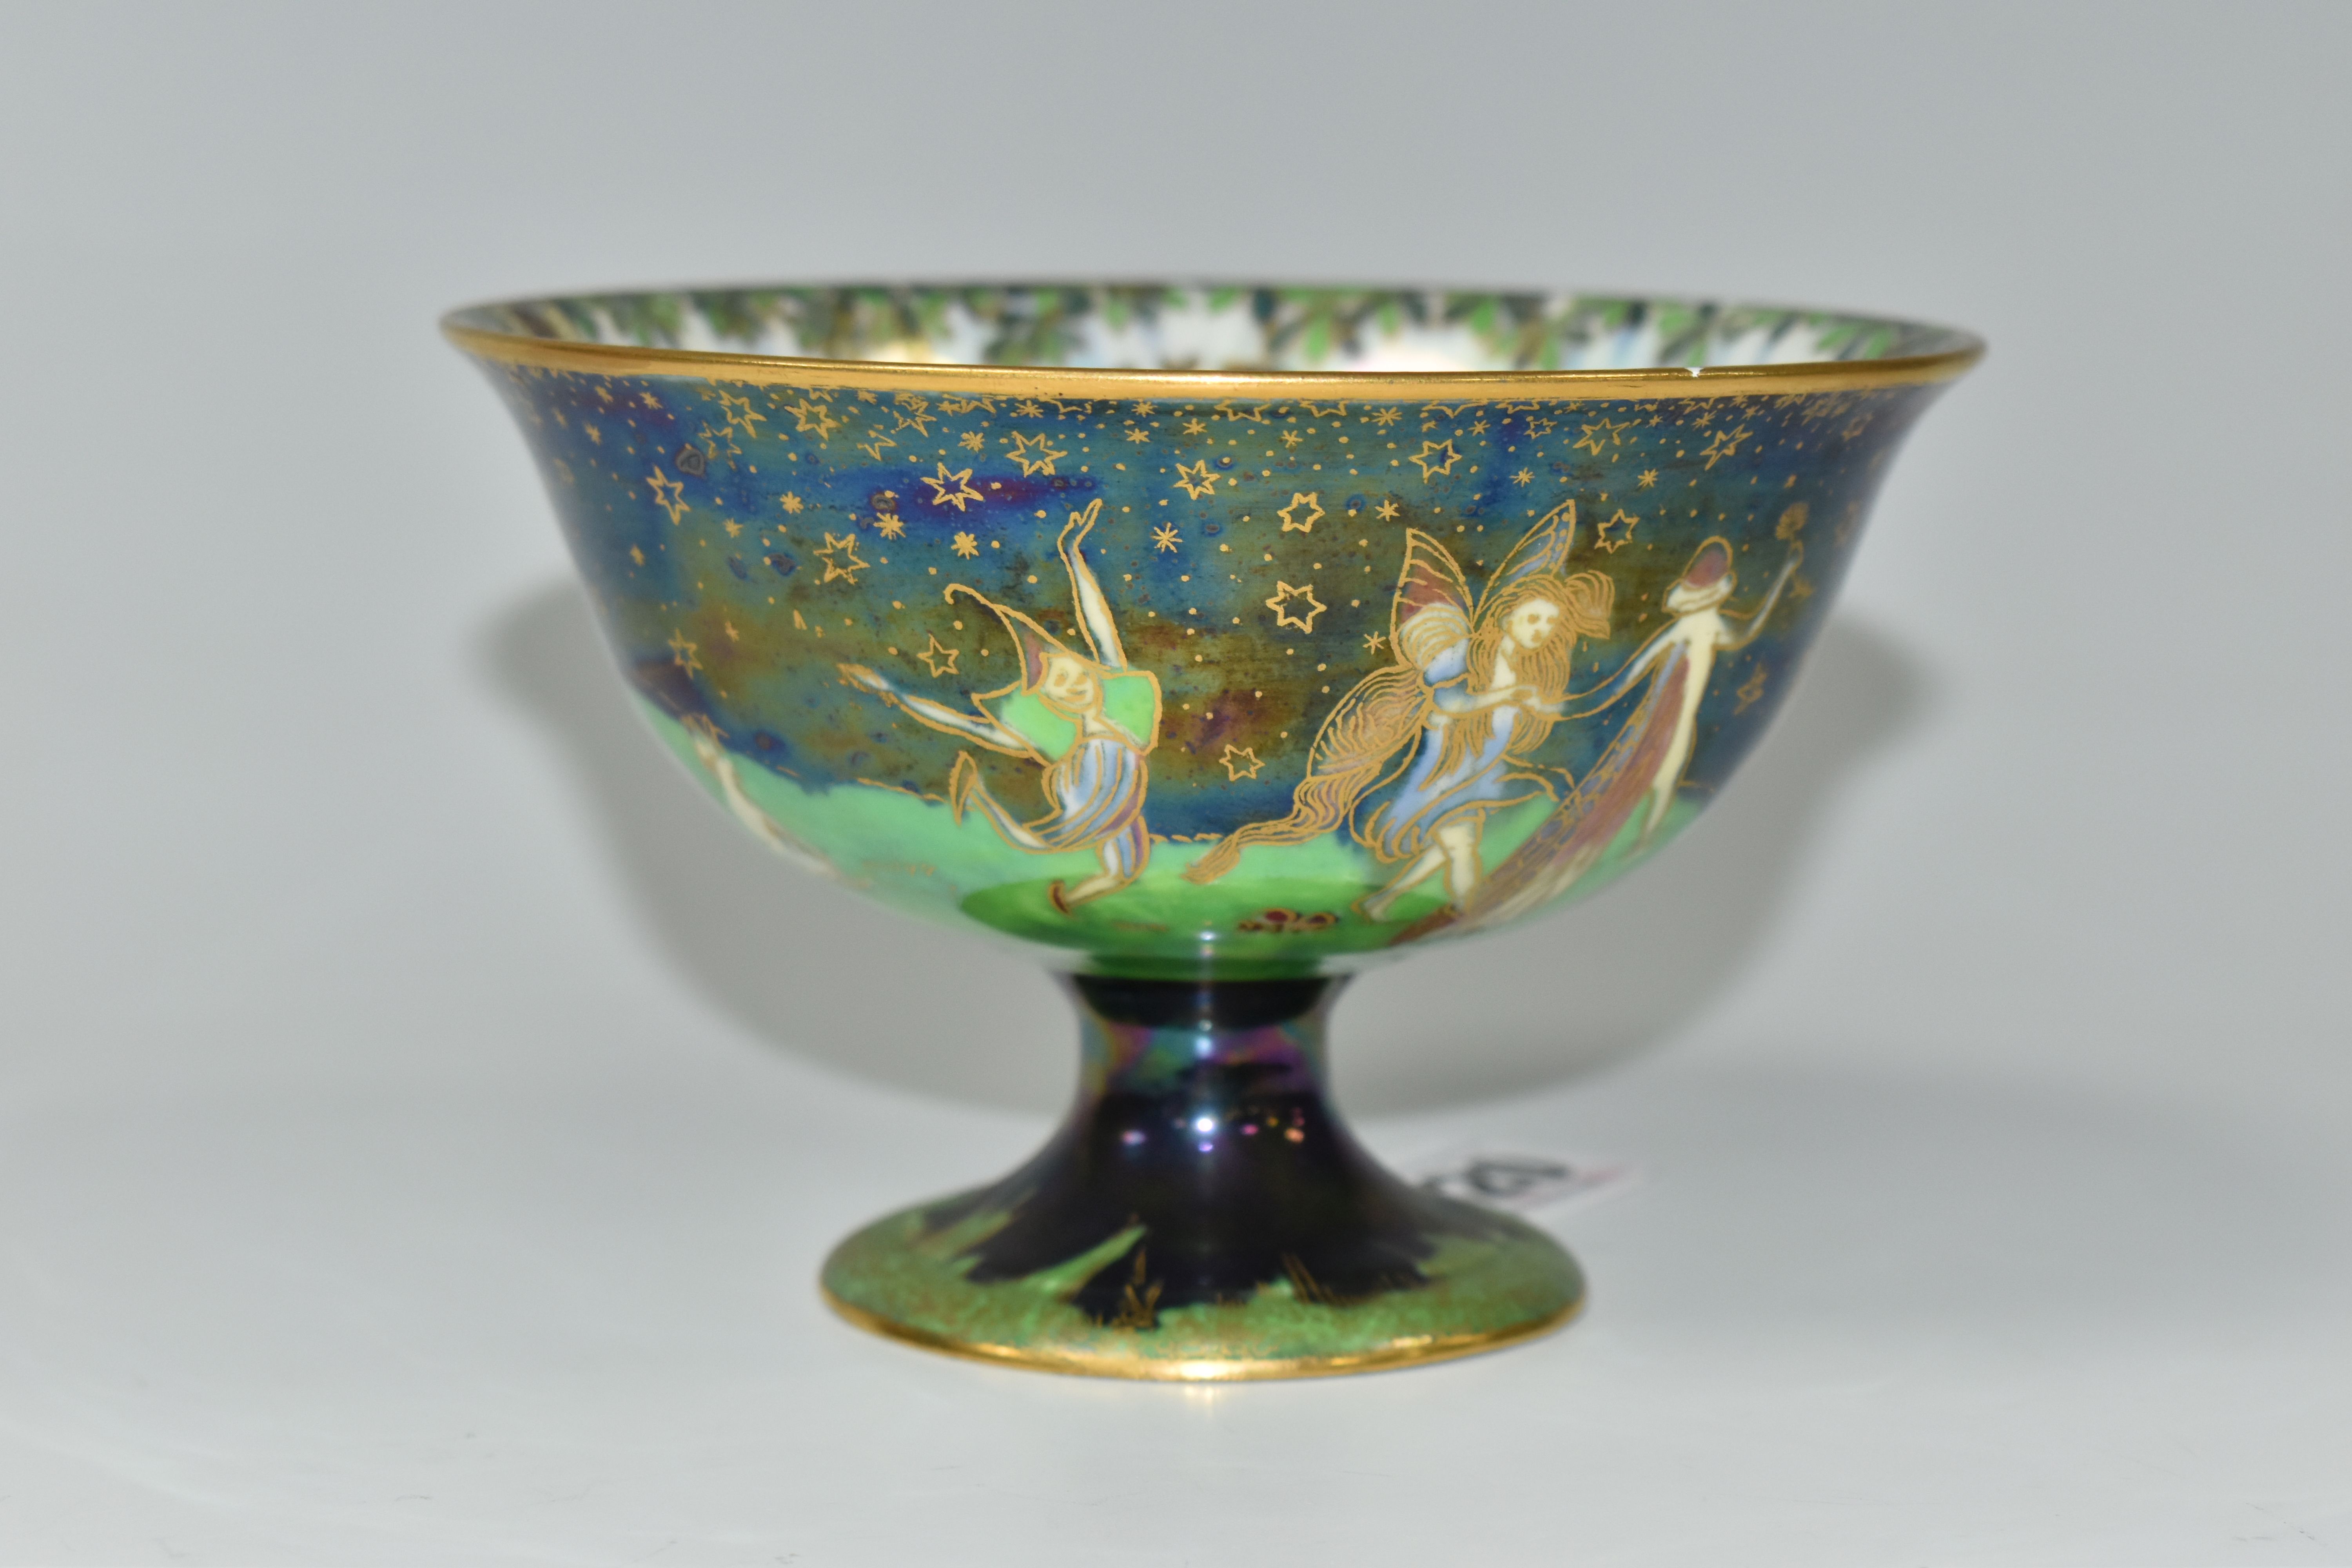 A WEDGWOOD FAIRYLAND LUSTRE FOOTED BOWL, decorated with a mother of pearl lustre with fairies in - Image 2 of 9